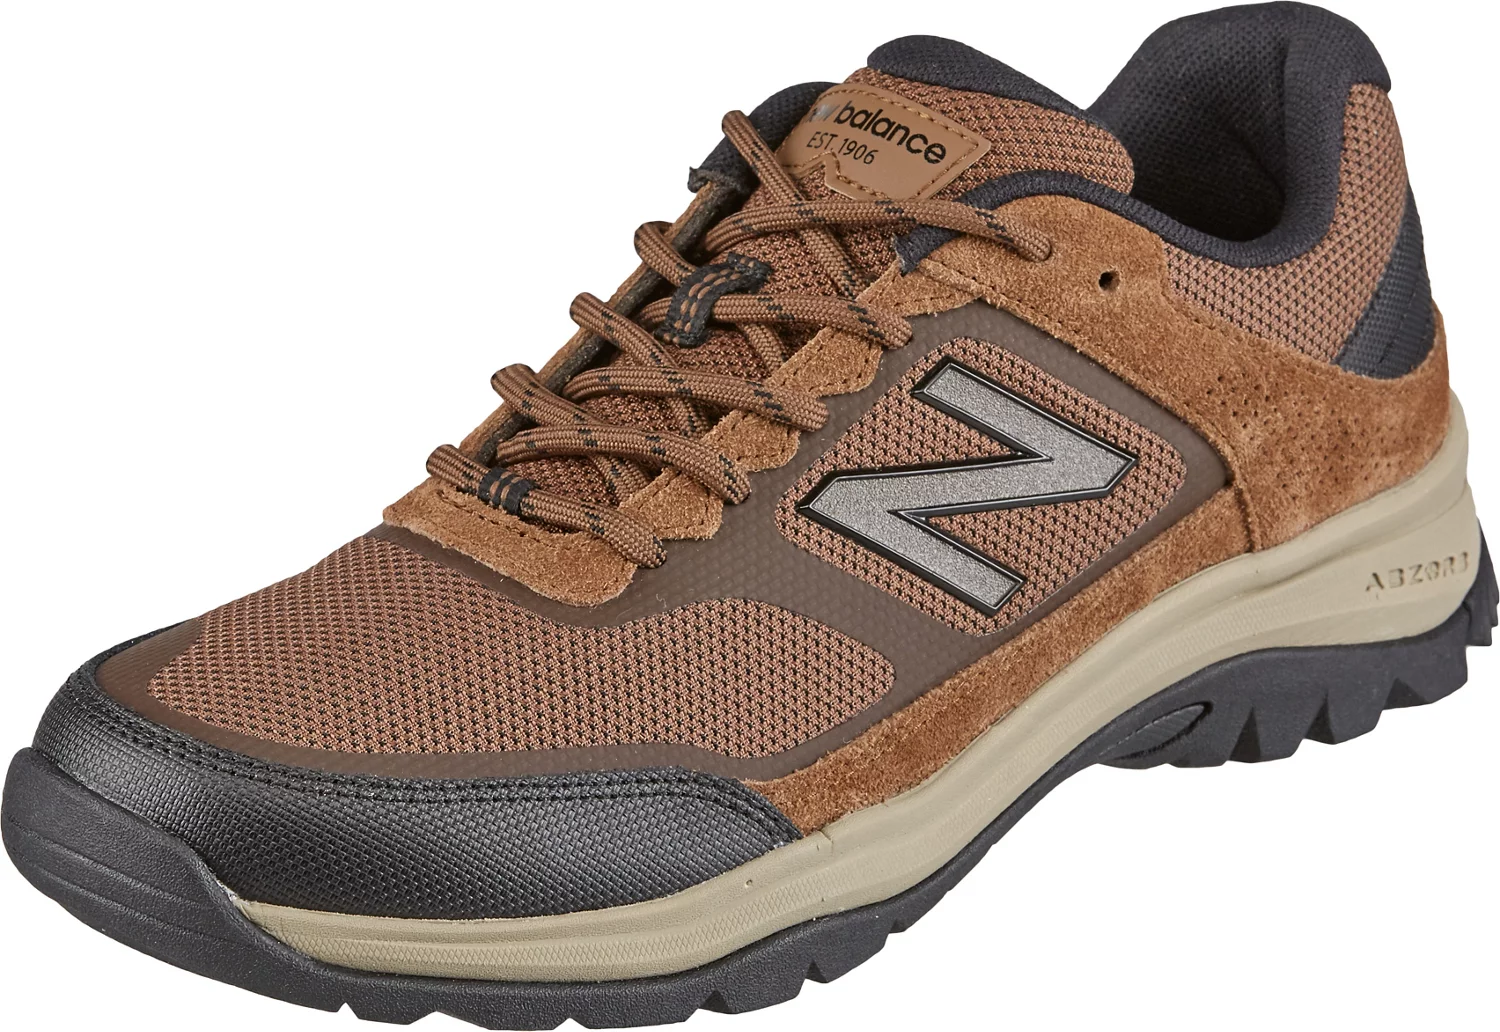 academy new balance mens shoes